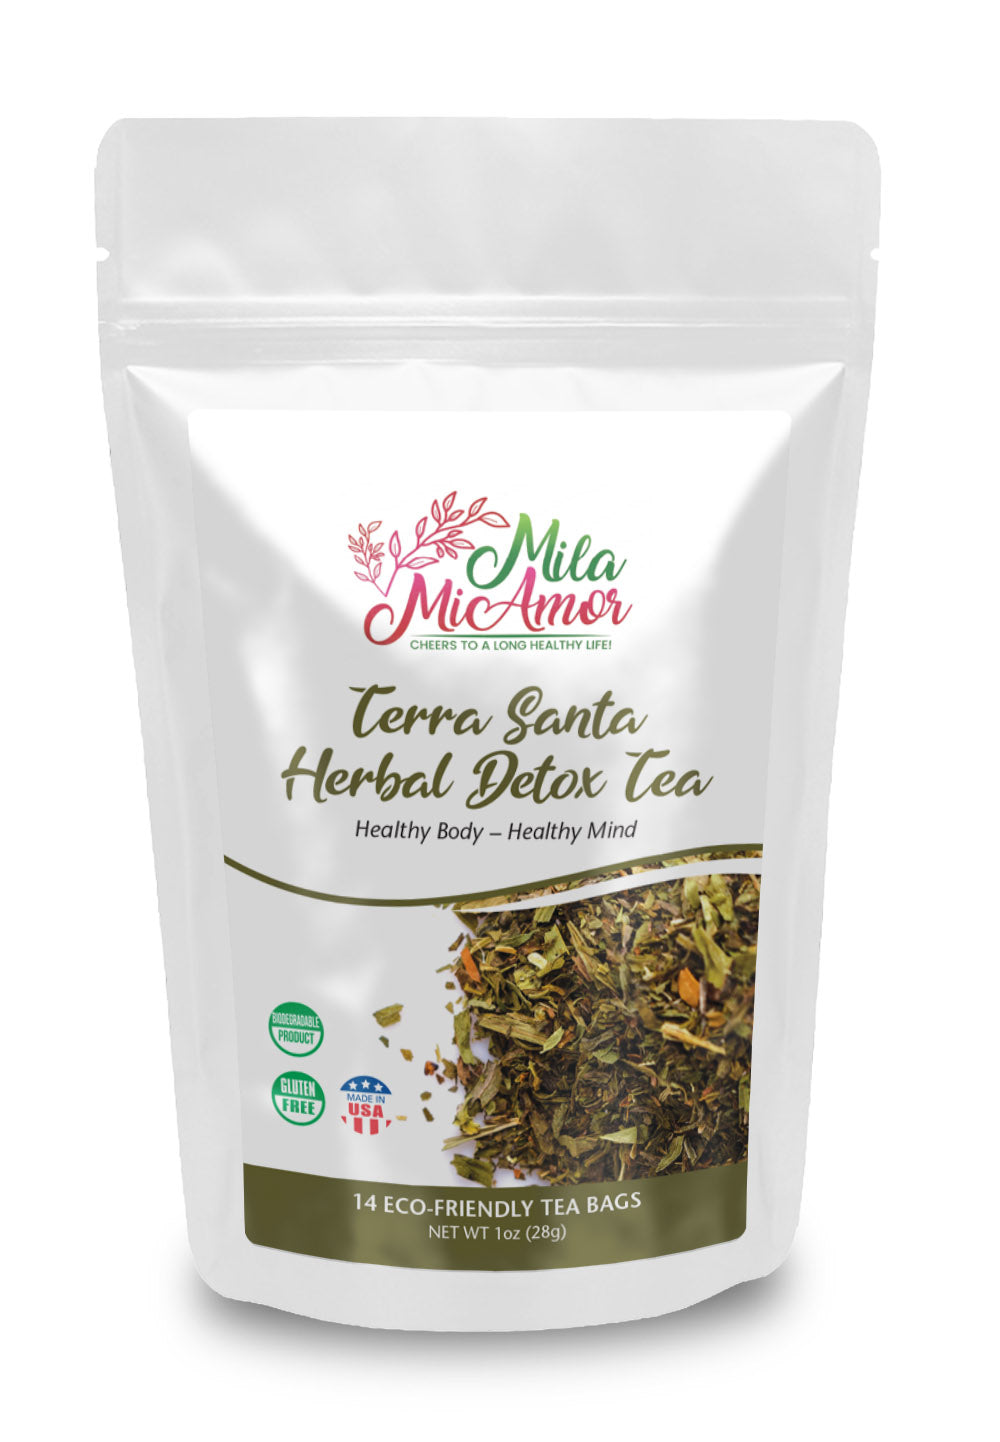 Cleanse | Detox Tea | Gut and Colon Support | Made in USA